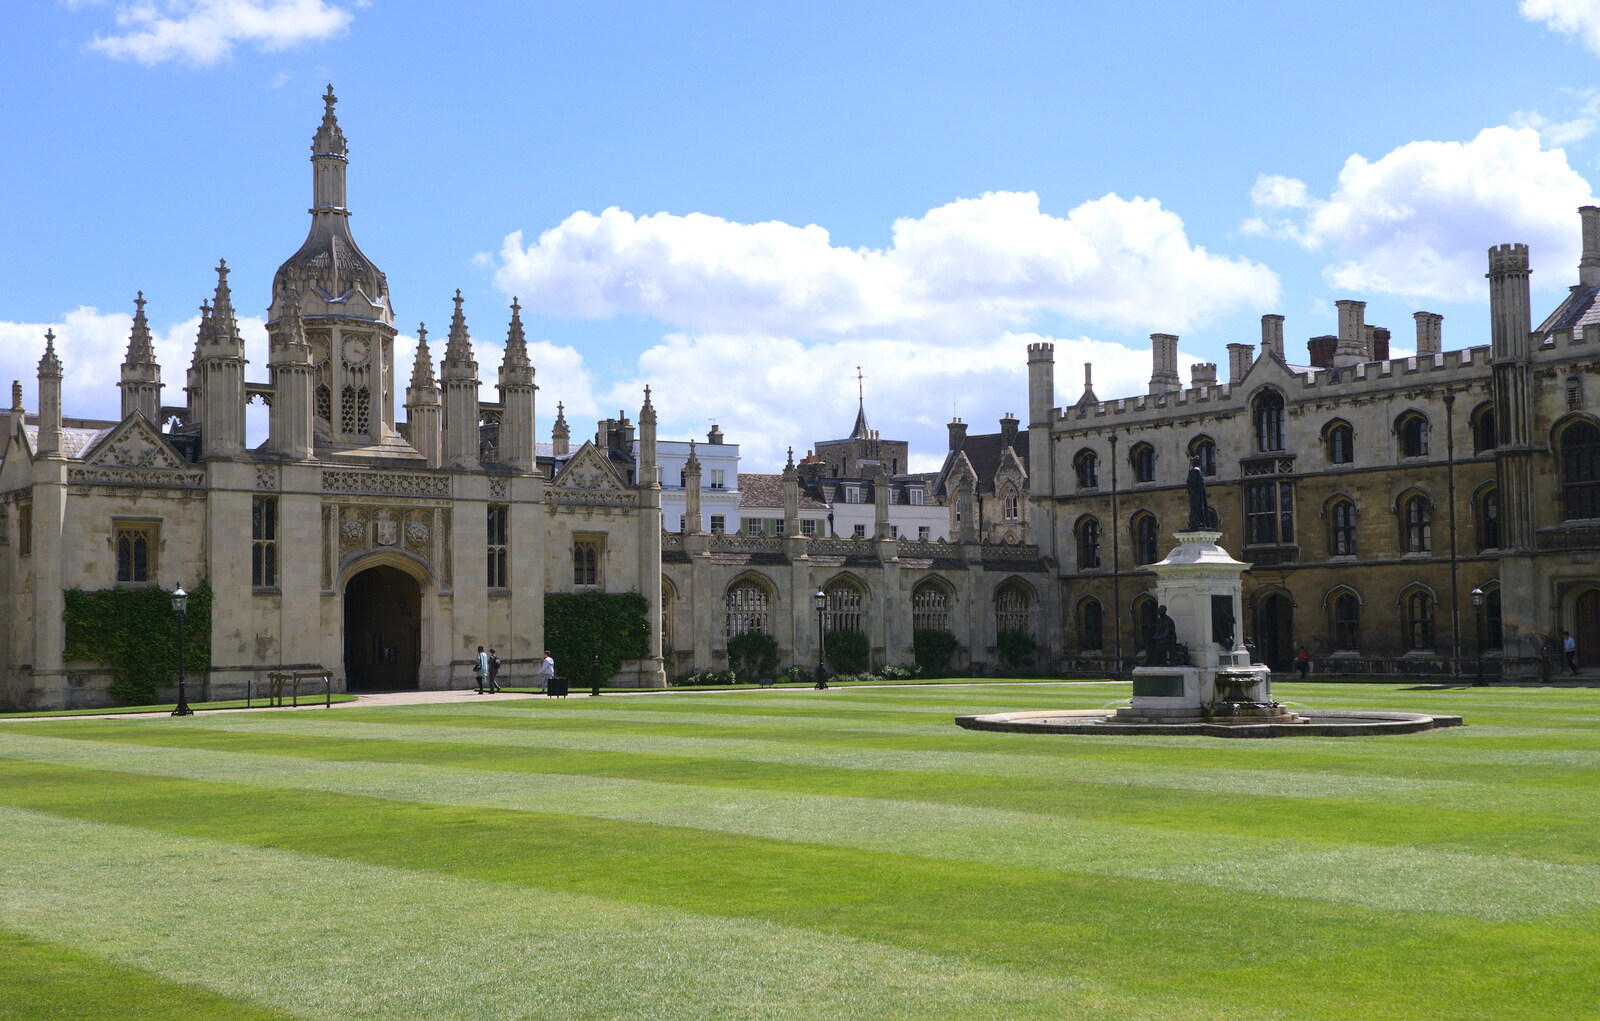 King's college Great Court from Punting With Grandad, Cambridge, Cambridgeshire - 6th June 2015